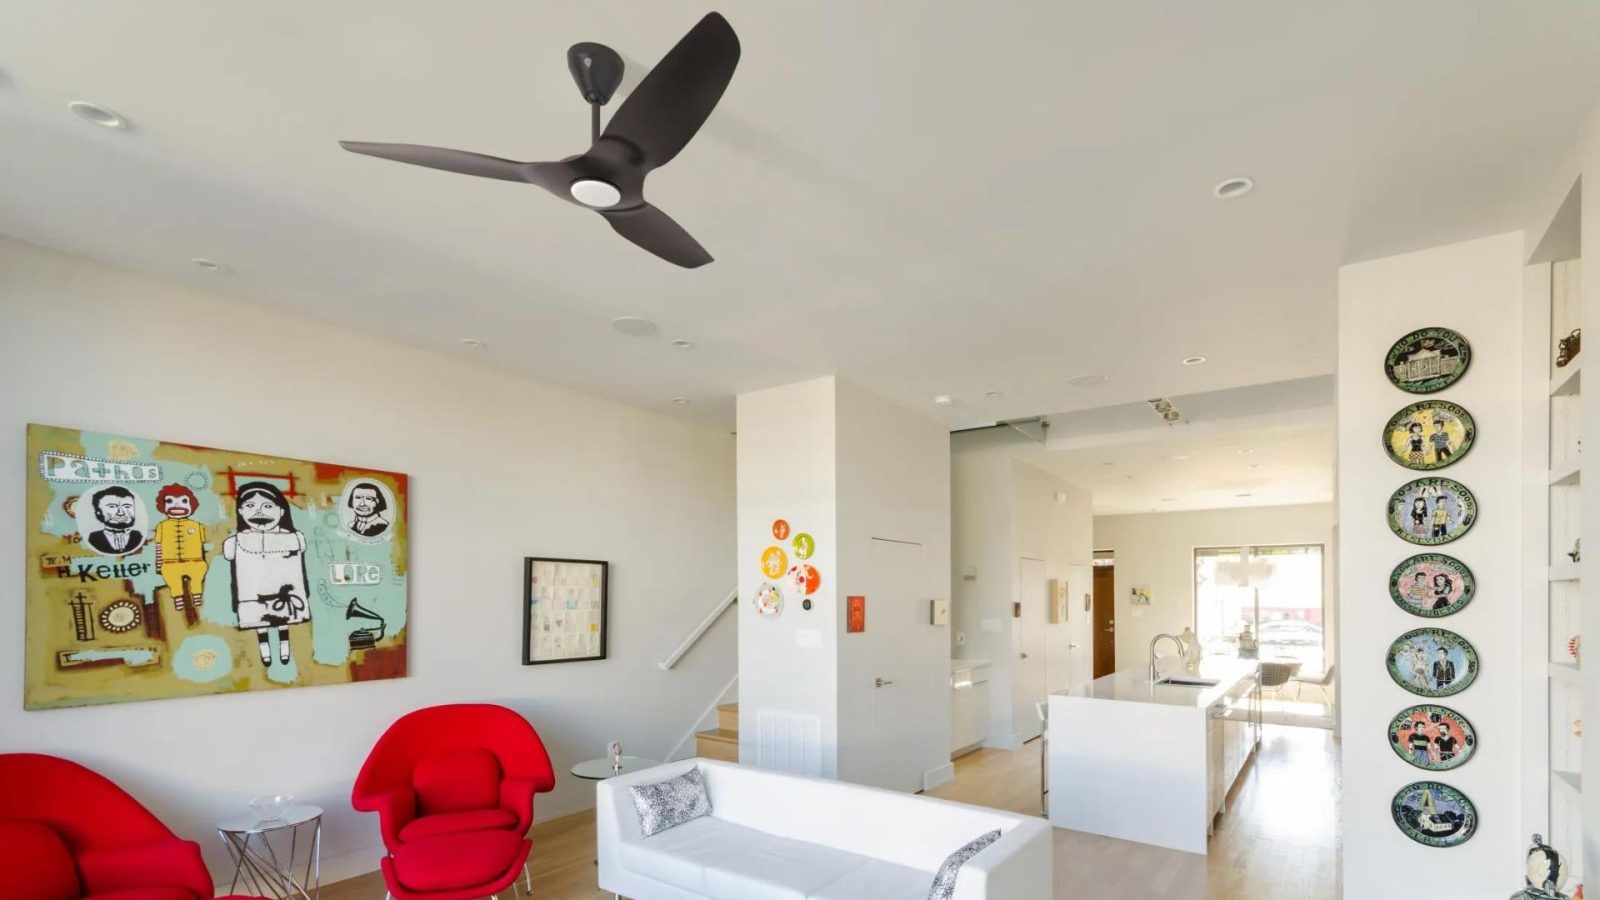 Best Premium Ceiling Fans To For